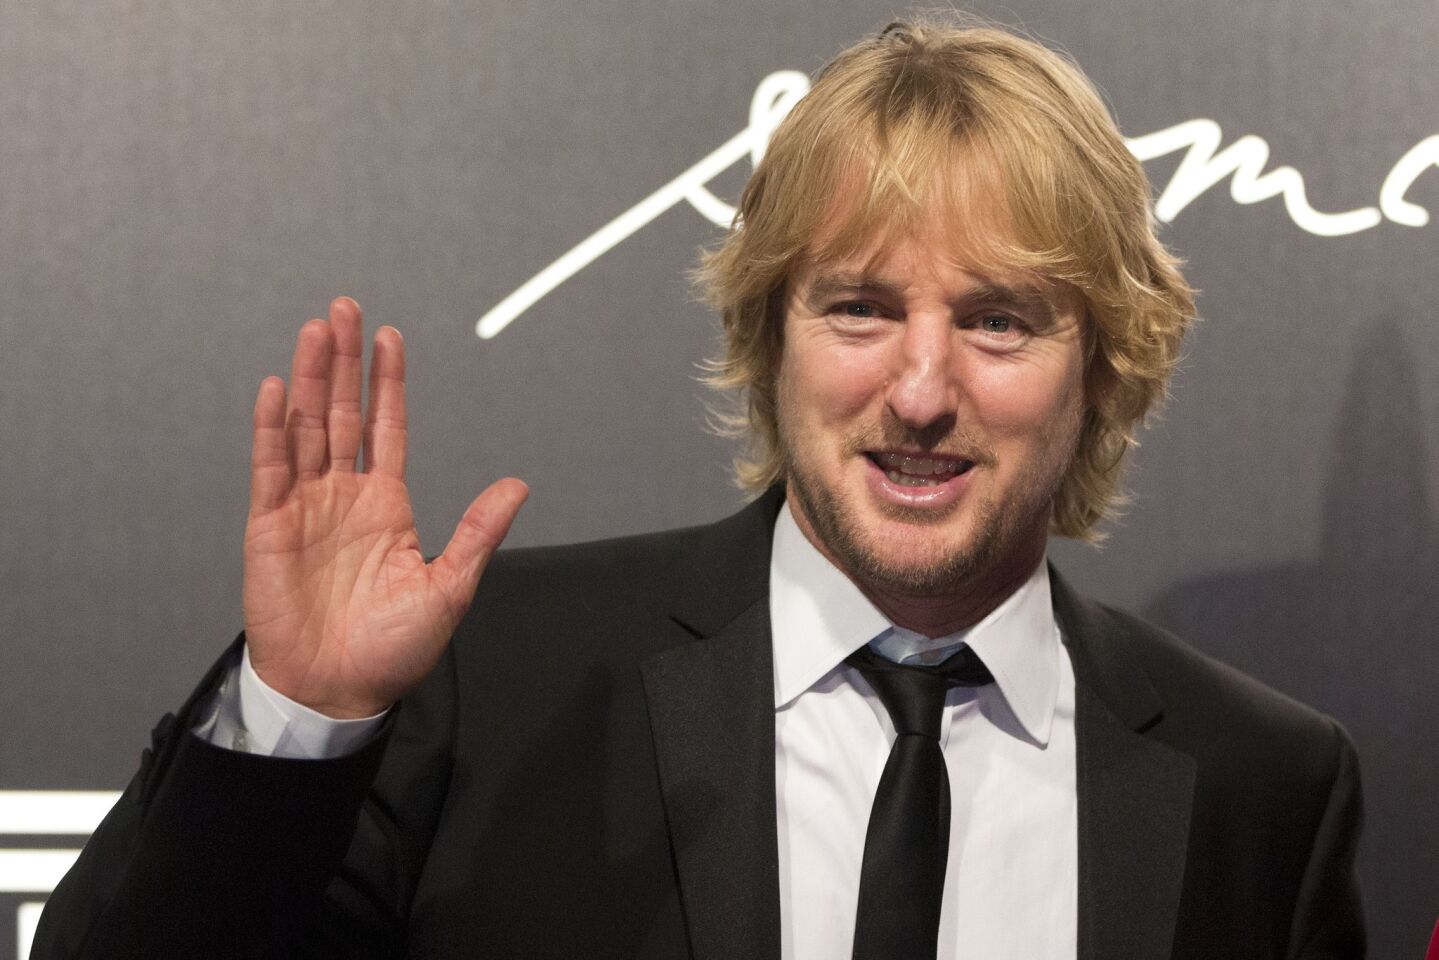 Owen Wilson and his personal trainer Caroline Lindqvist have welcomed their first child together. The baby's name is Finn Lindqvist Wilson, taking his mother's last name as his official middle name. Wilson and Lindqvist met in 2003 and remained close over the years. This will be the second child for Wilson, who is already father to a little guy named Robert Ford with ex-girlfriend Jade Duell.